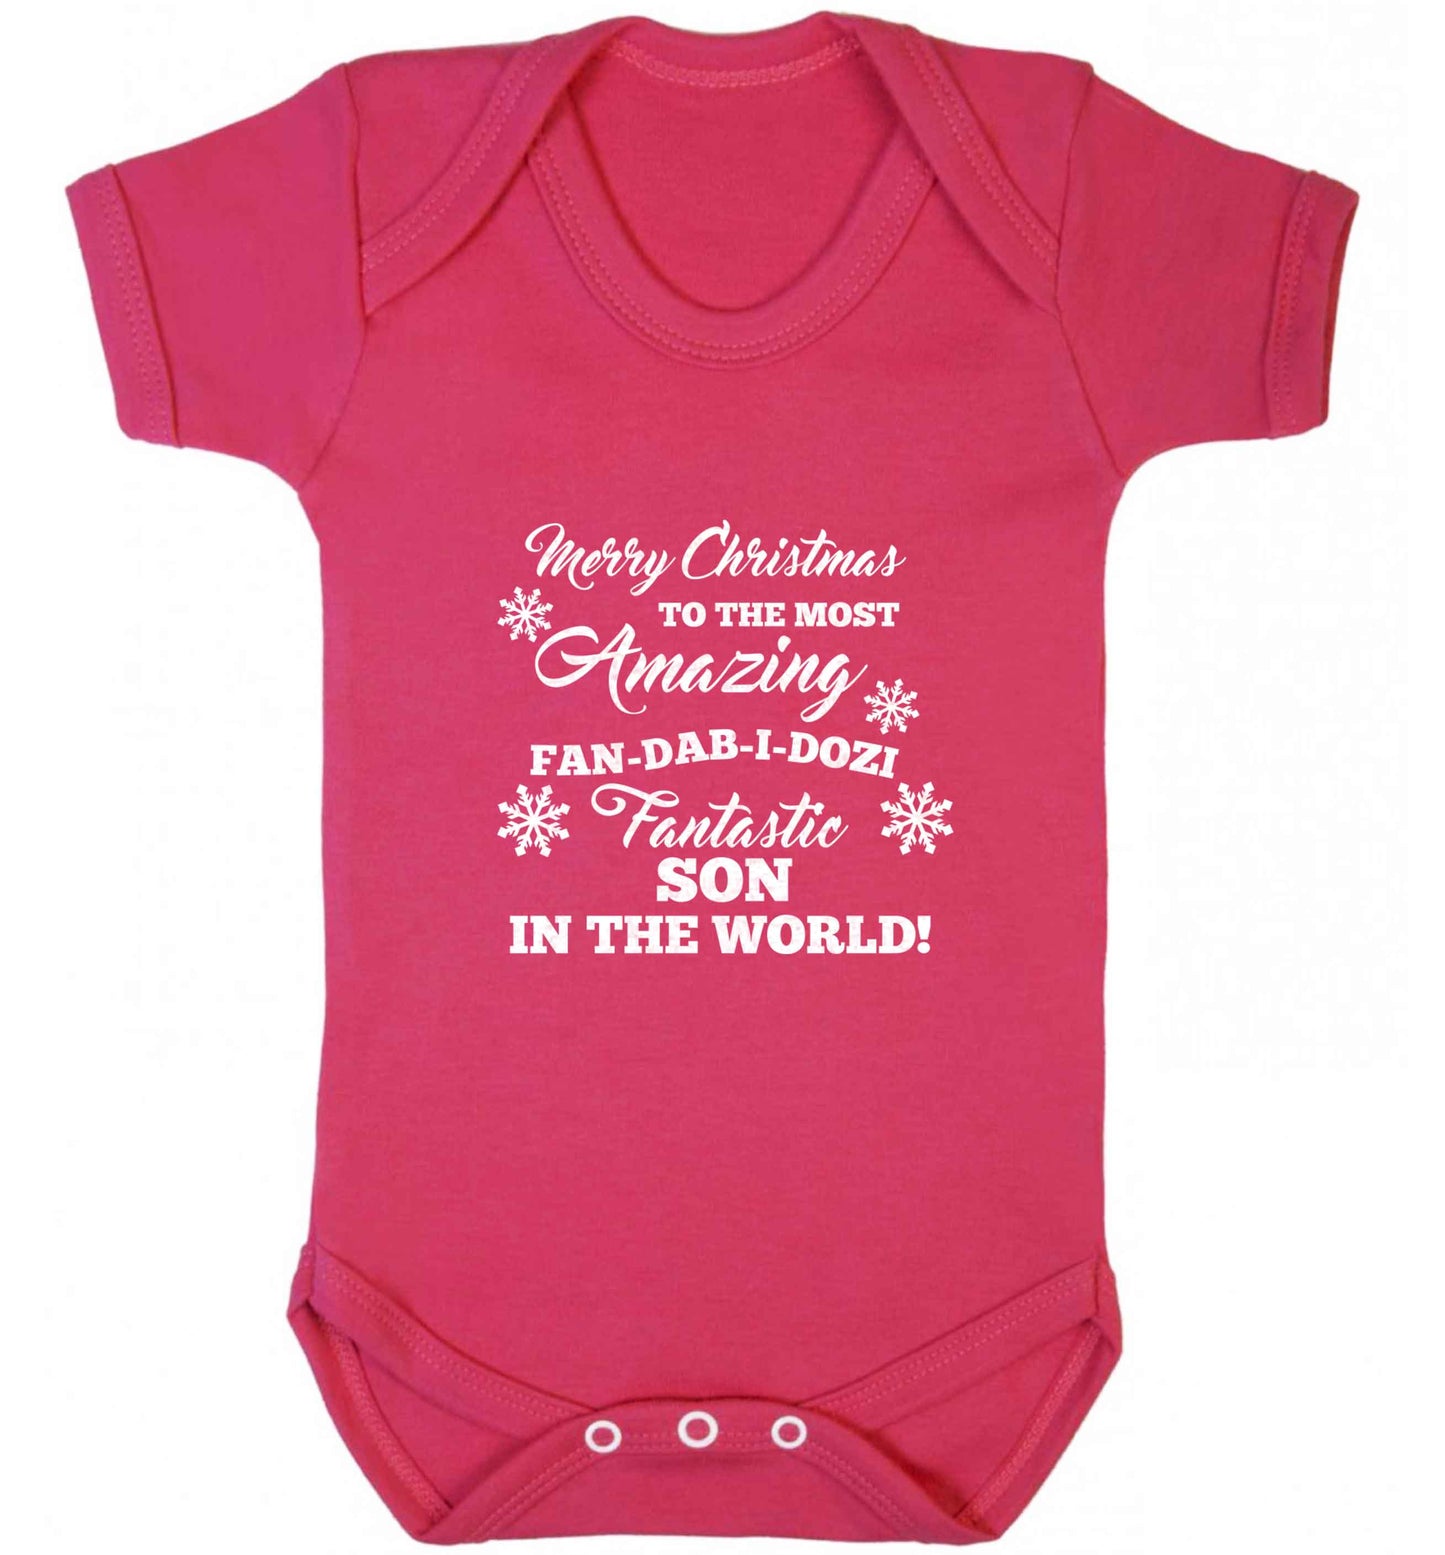 Merry Christmas to the most amazing fan-dab-i-dozi fantasic Son in the world baby vest dark pink 18-24 months